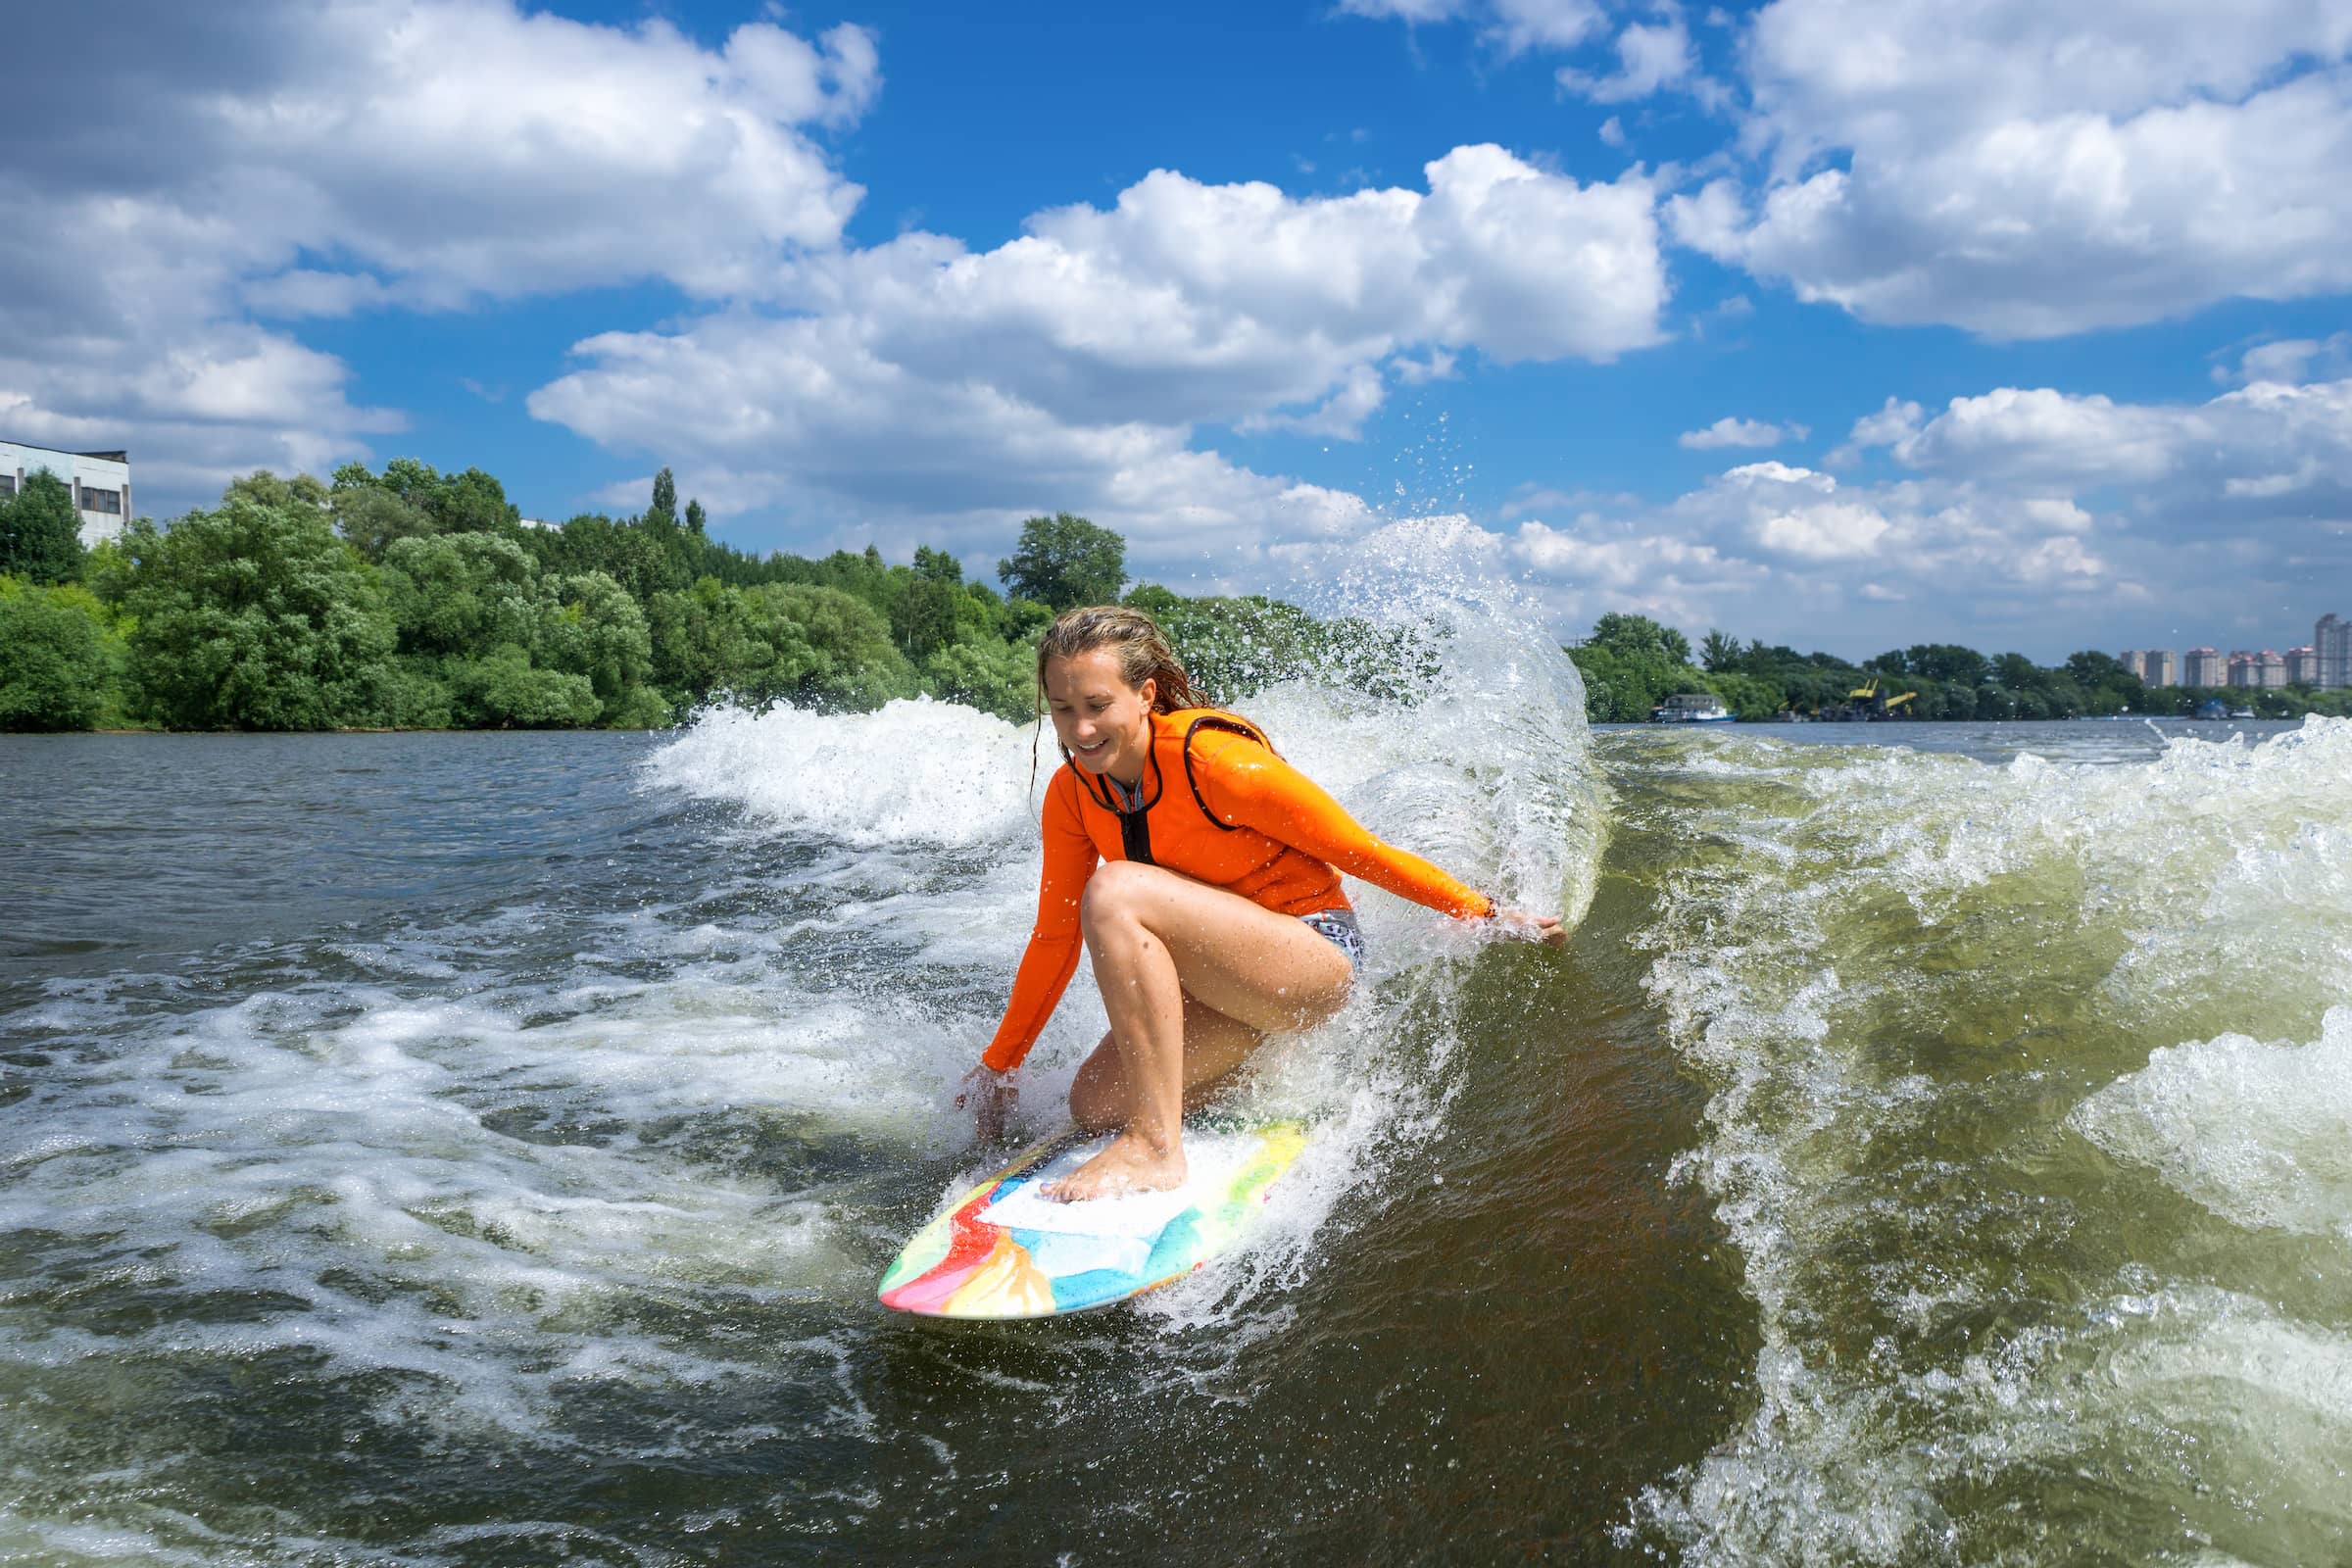 Young person wakesurfing